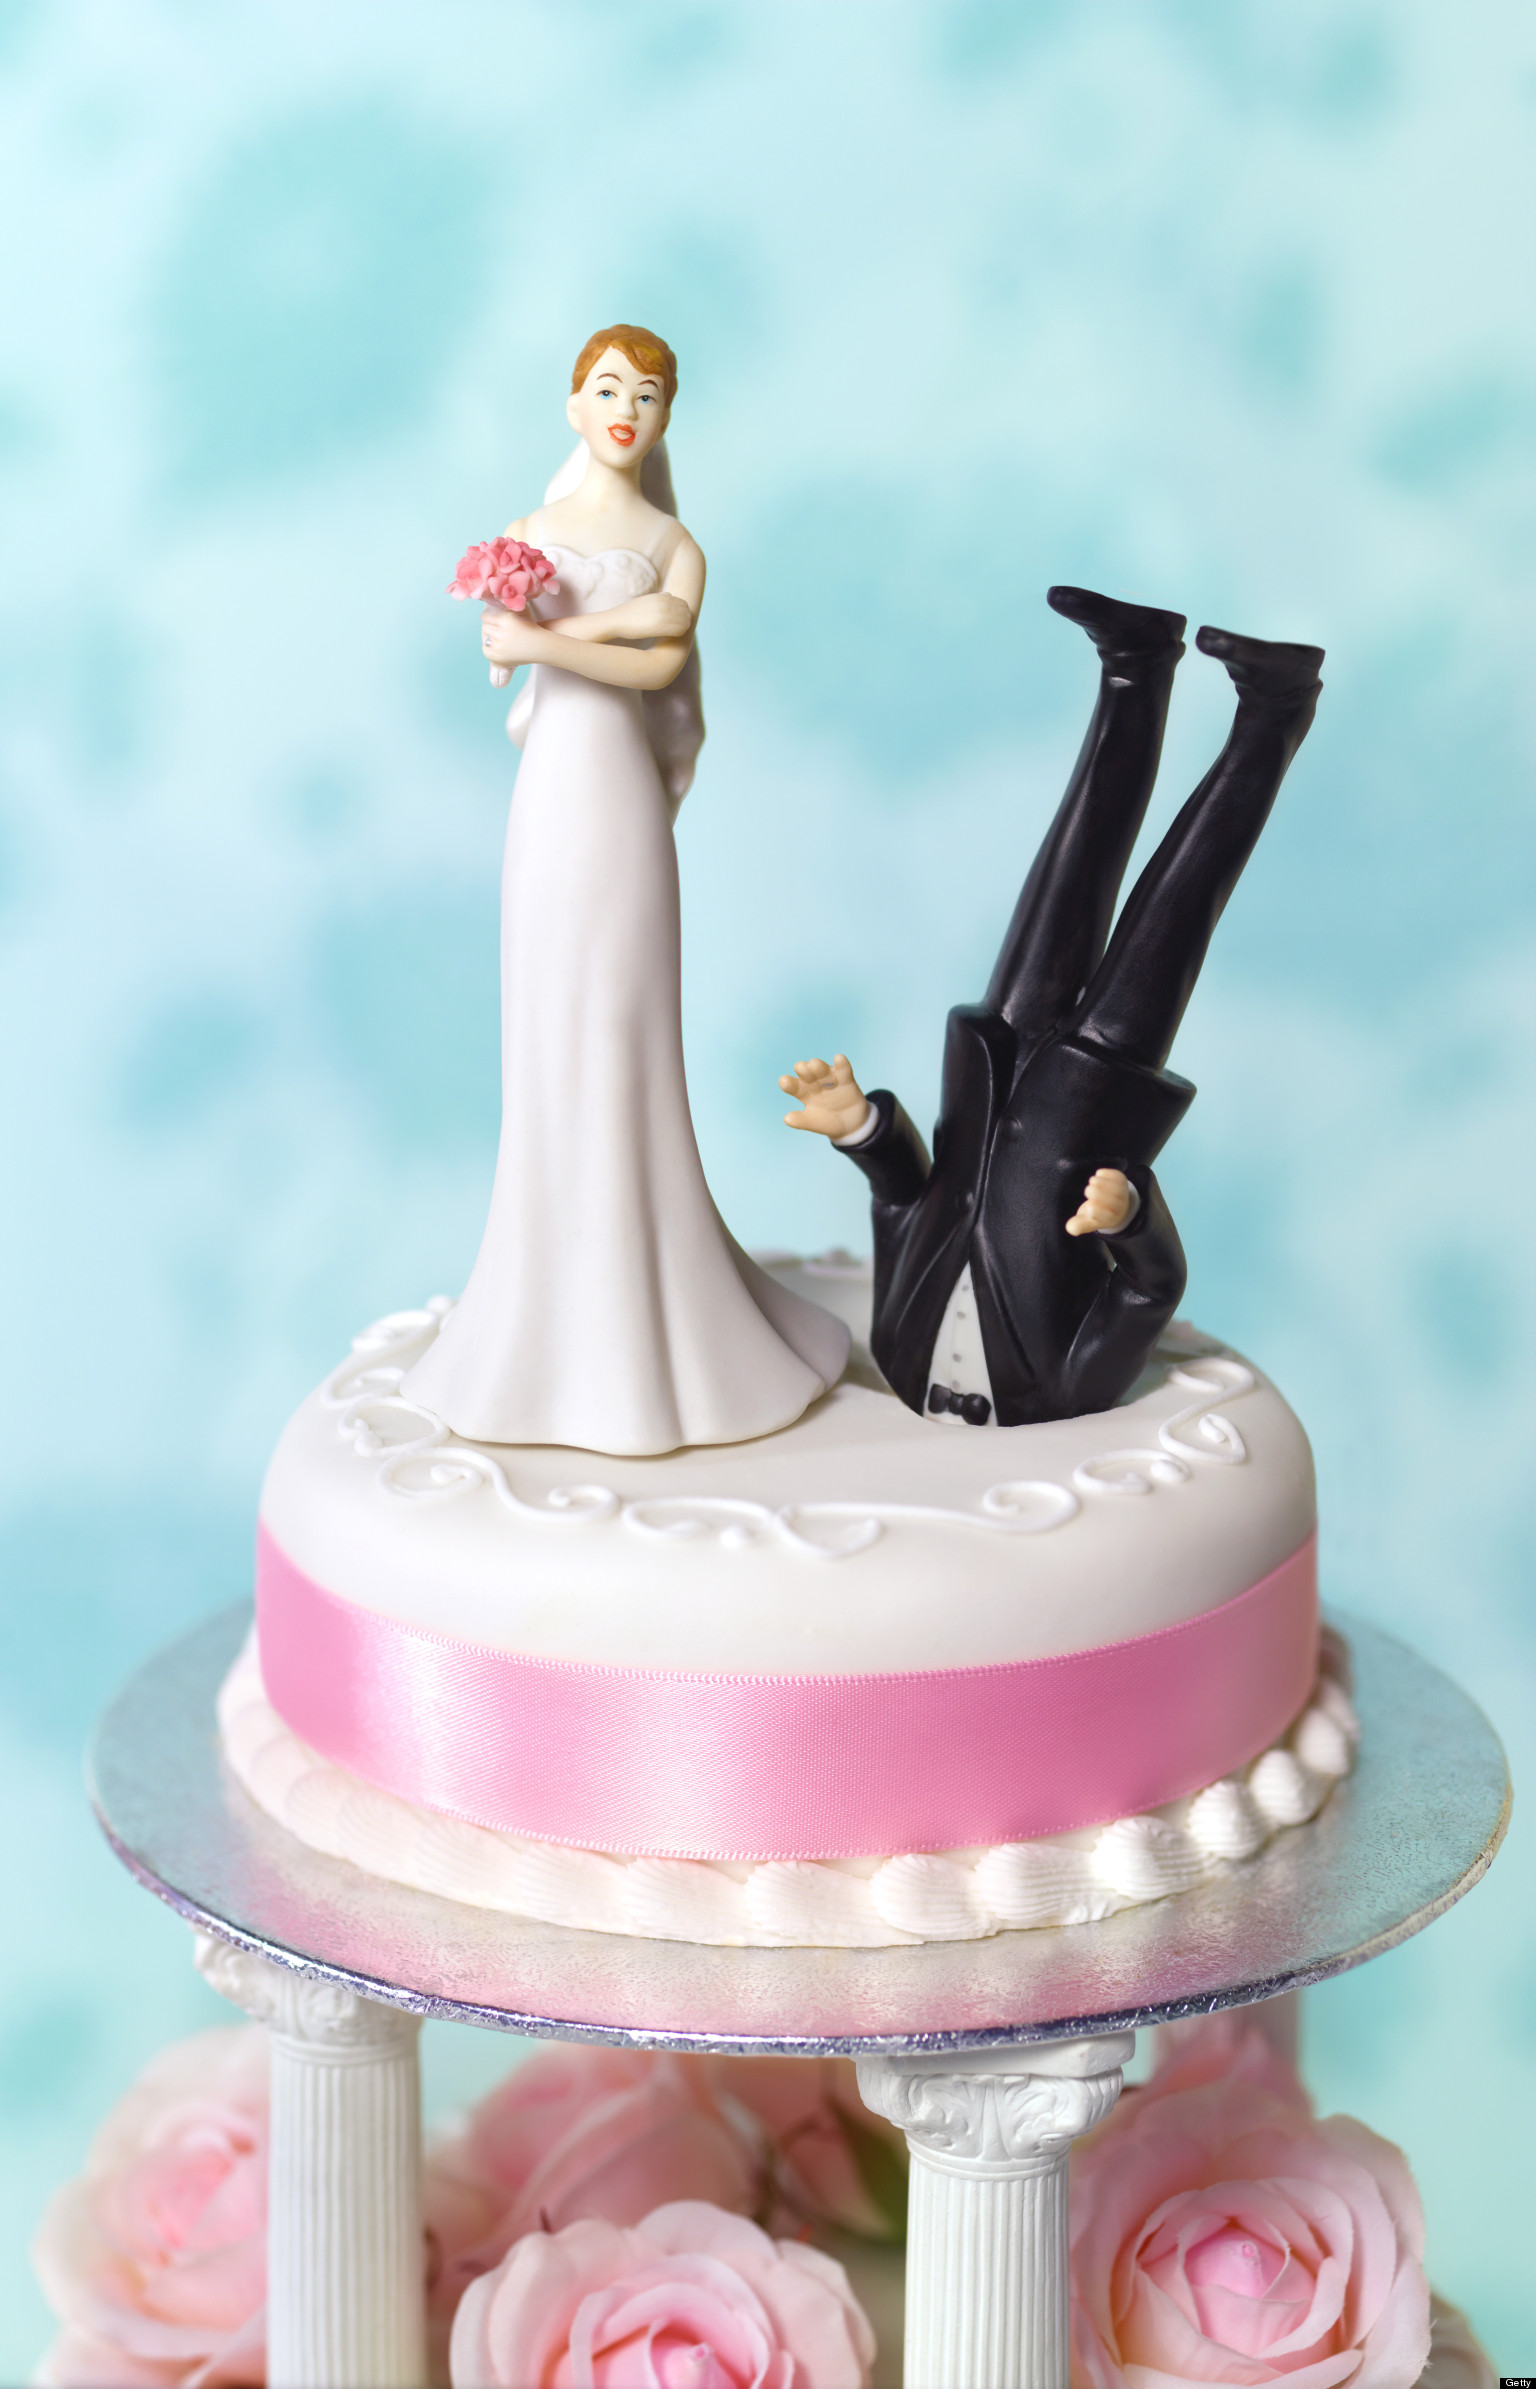 Funny Divorce: What Huffpost Divorce Readers' Wedding Cake Toppers